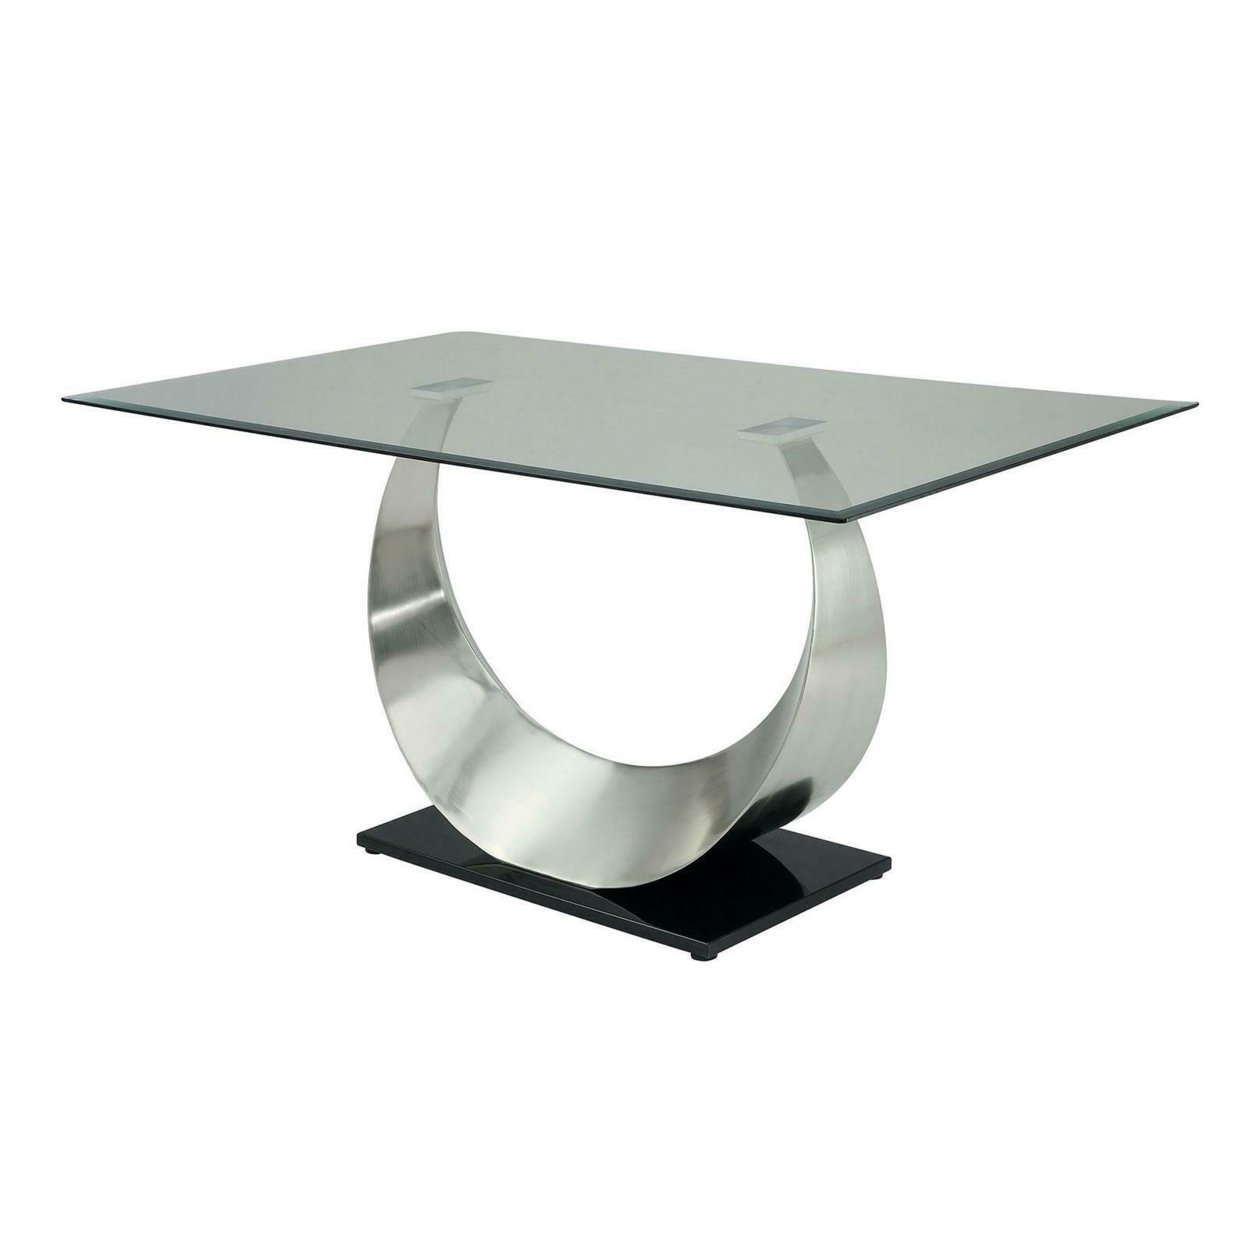 Metal And Glass Dining Table With Unique U Shape Pedestal Base, Chrome And Black- Saltoro Sherpi